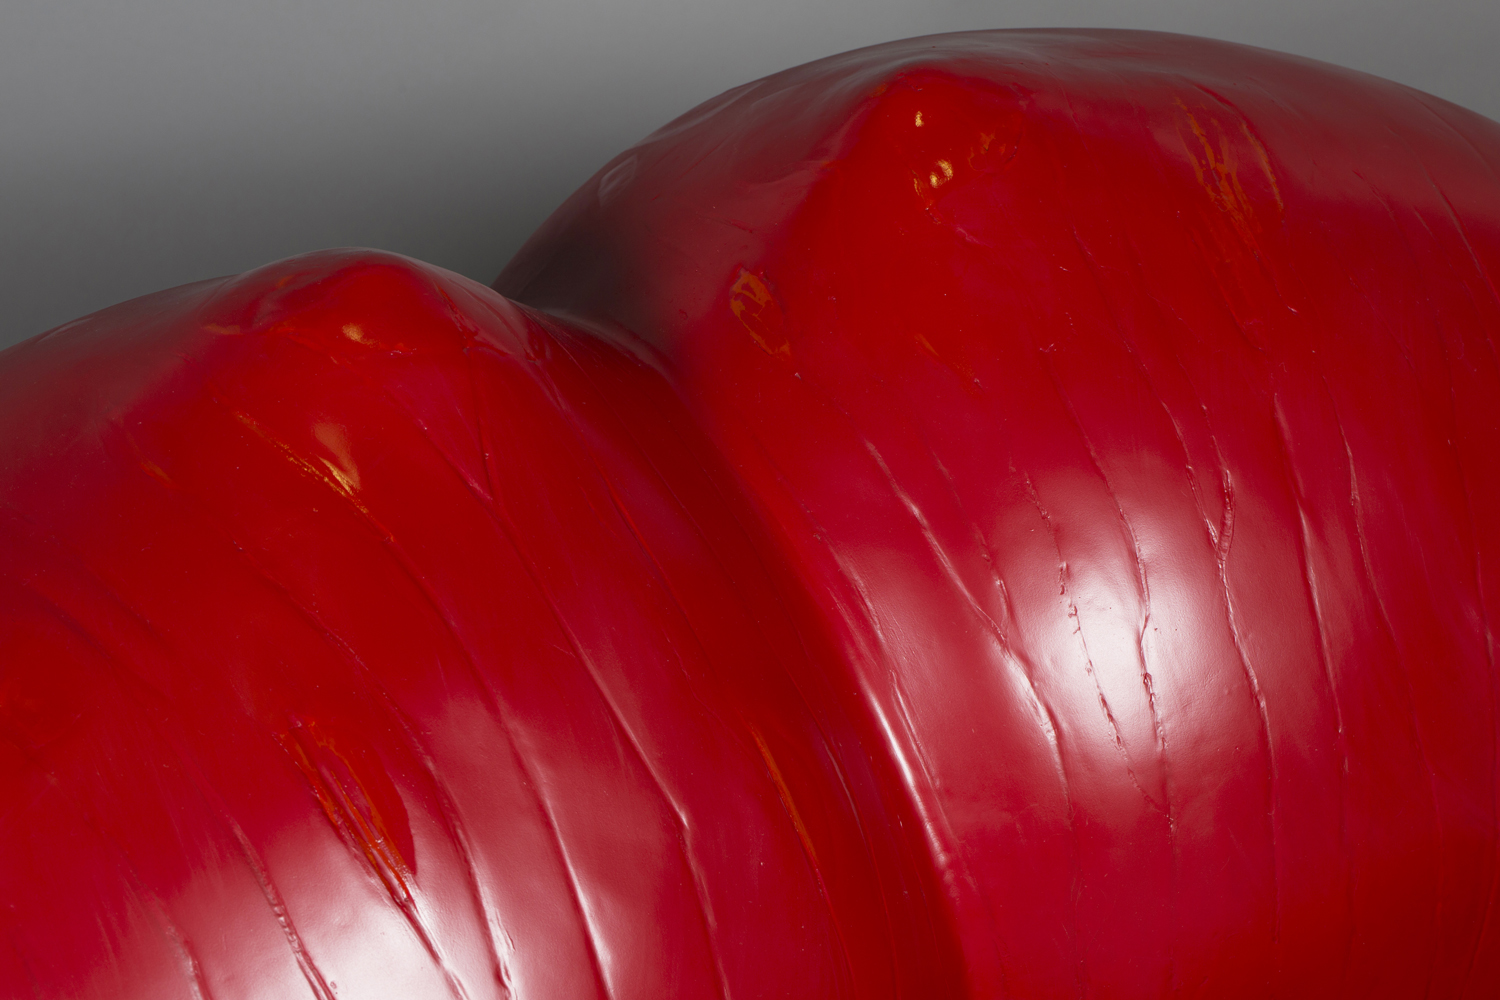 A Louis Durot red polyurethane and foam 'L'échauffeuse' sofa sculpture, moulded in the form of a - Image 3 of 3